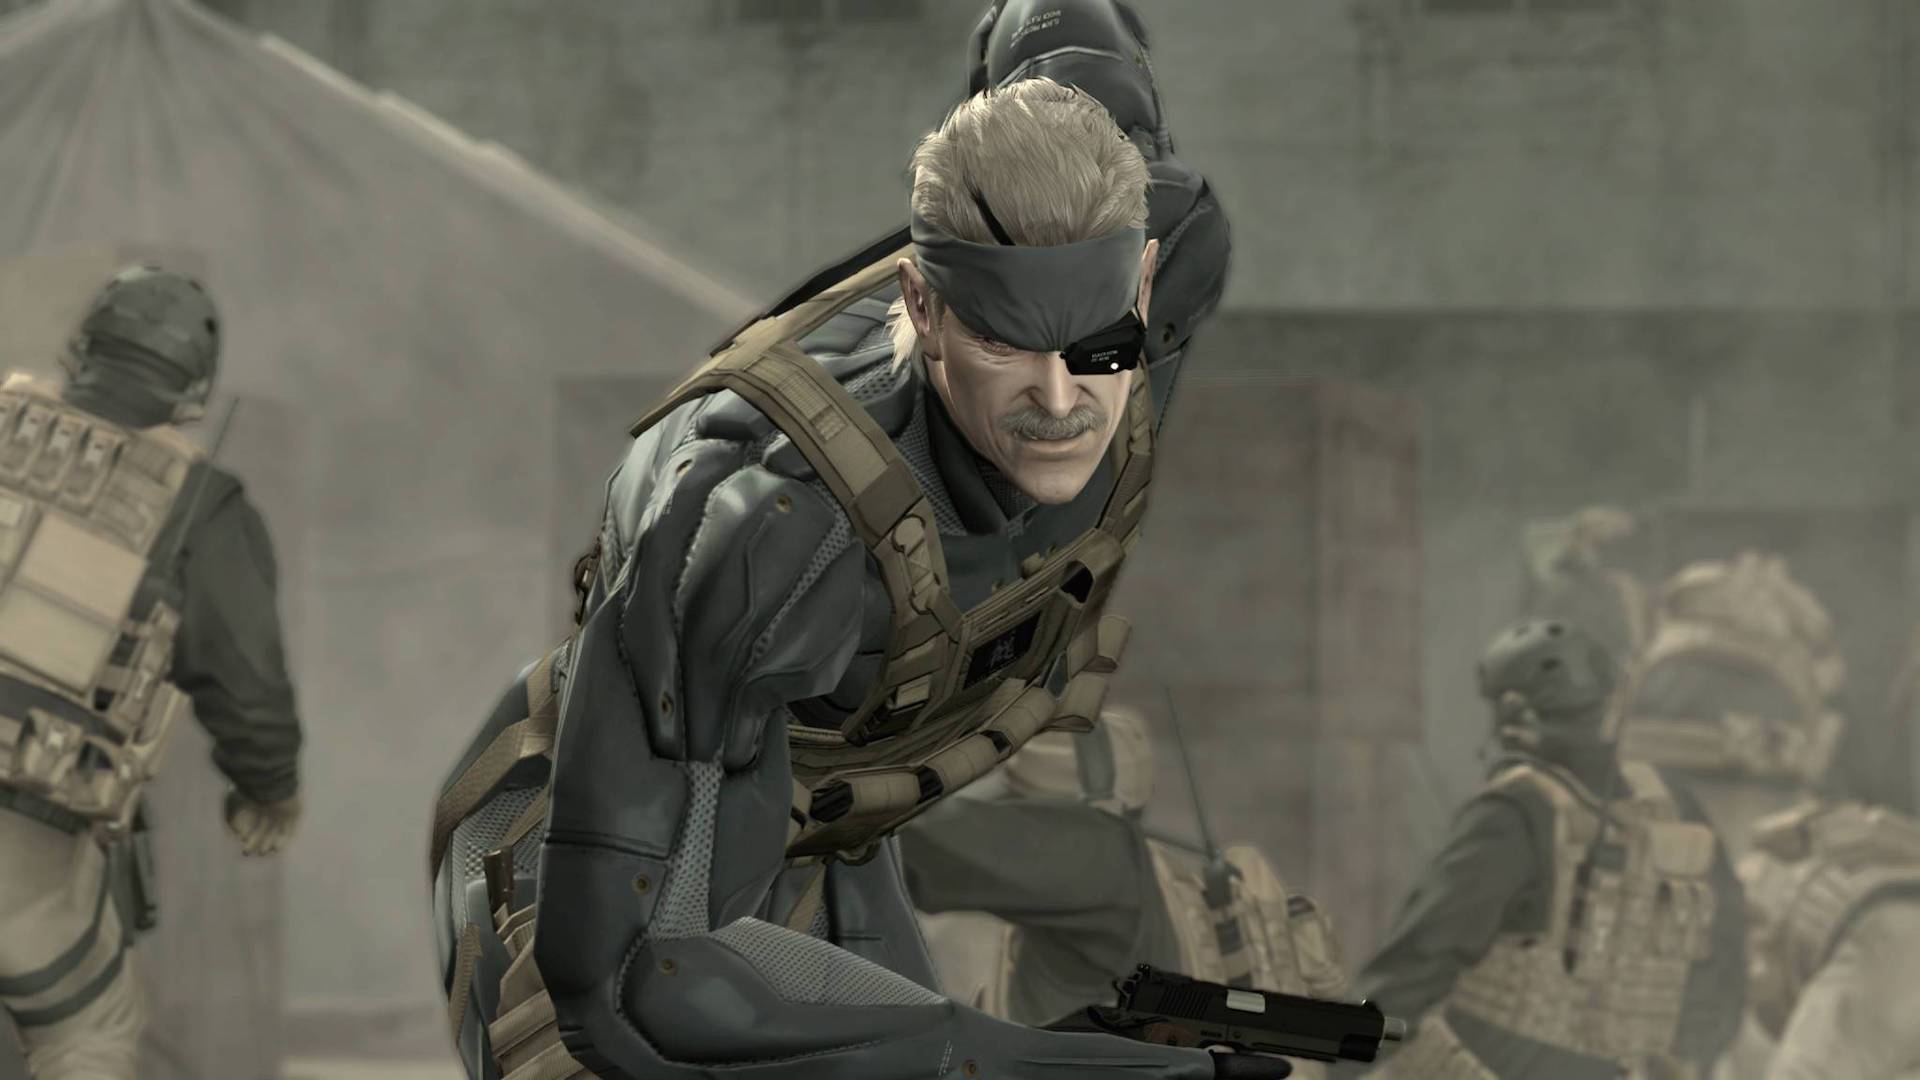 Master Collection Vol. 2 Could Have Metal Gear Solid 4, 5 and Peace Walker – Rumor